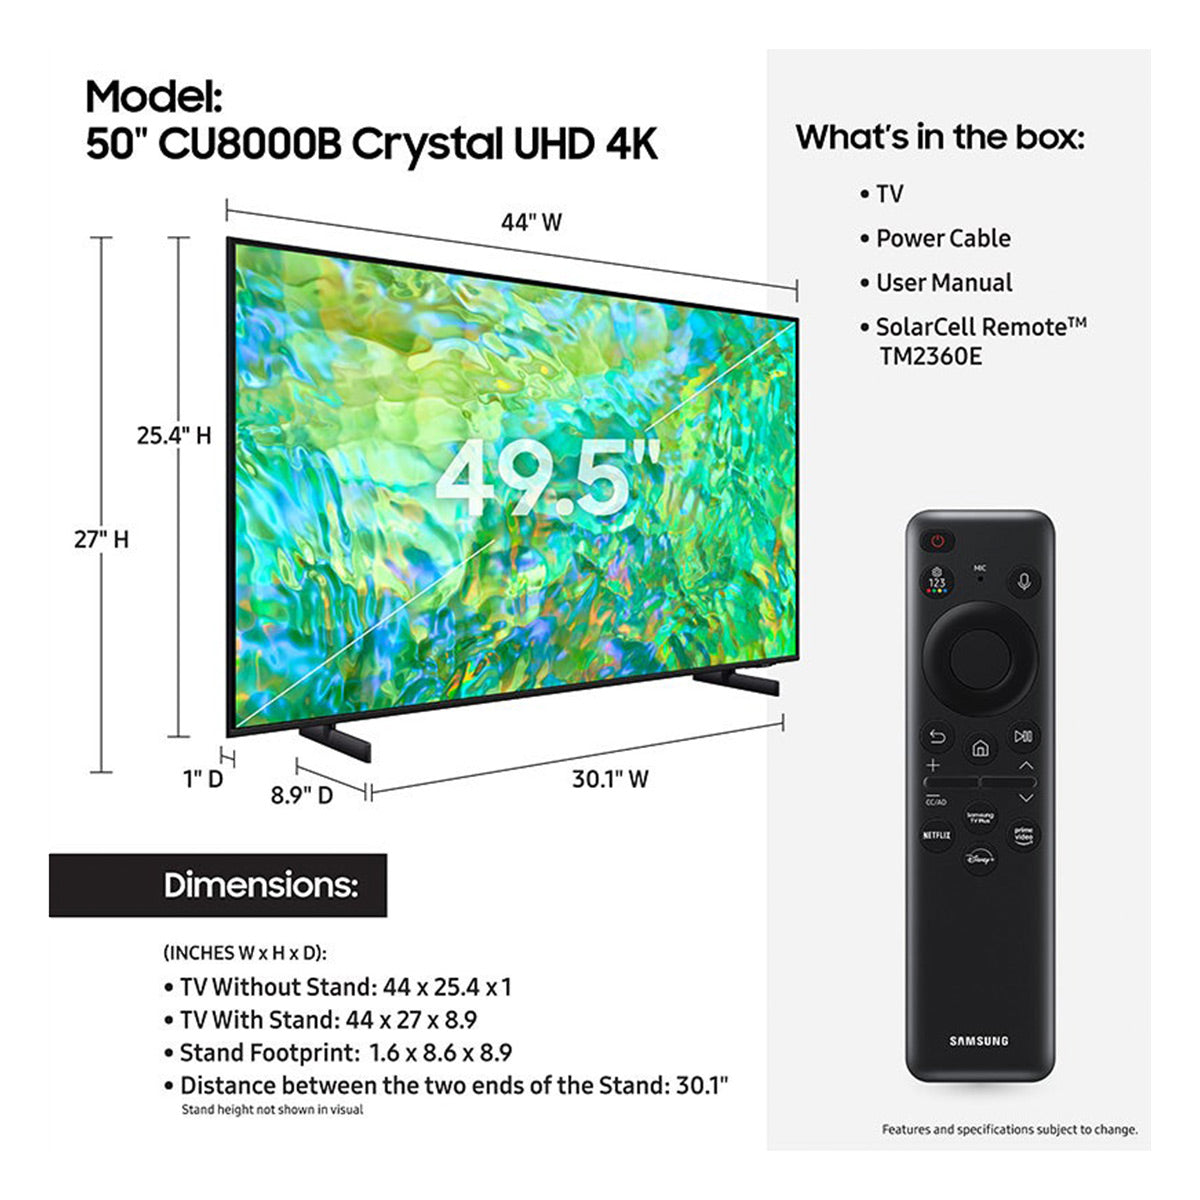 Samsung UN50CU8000 50" Crystal UHD 4K Smart TV with HDR, Object Tracking Sound Lite, & 4K Upscaling (2023)